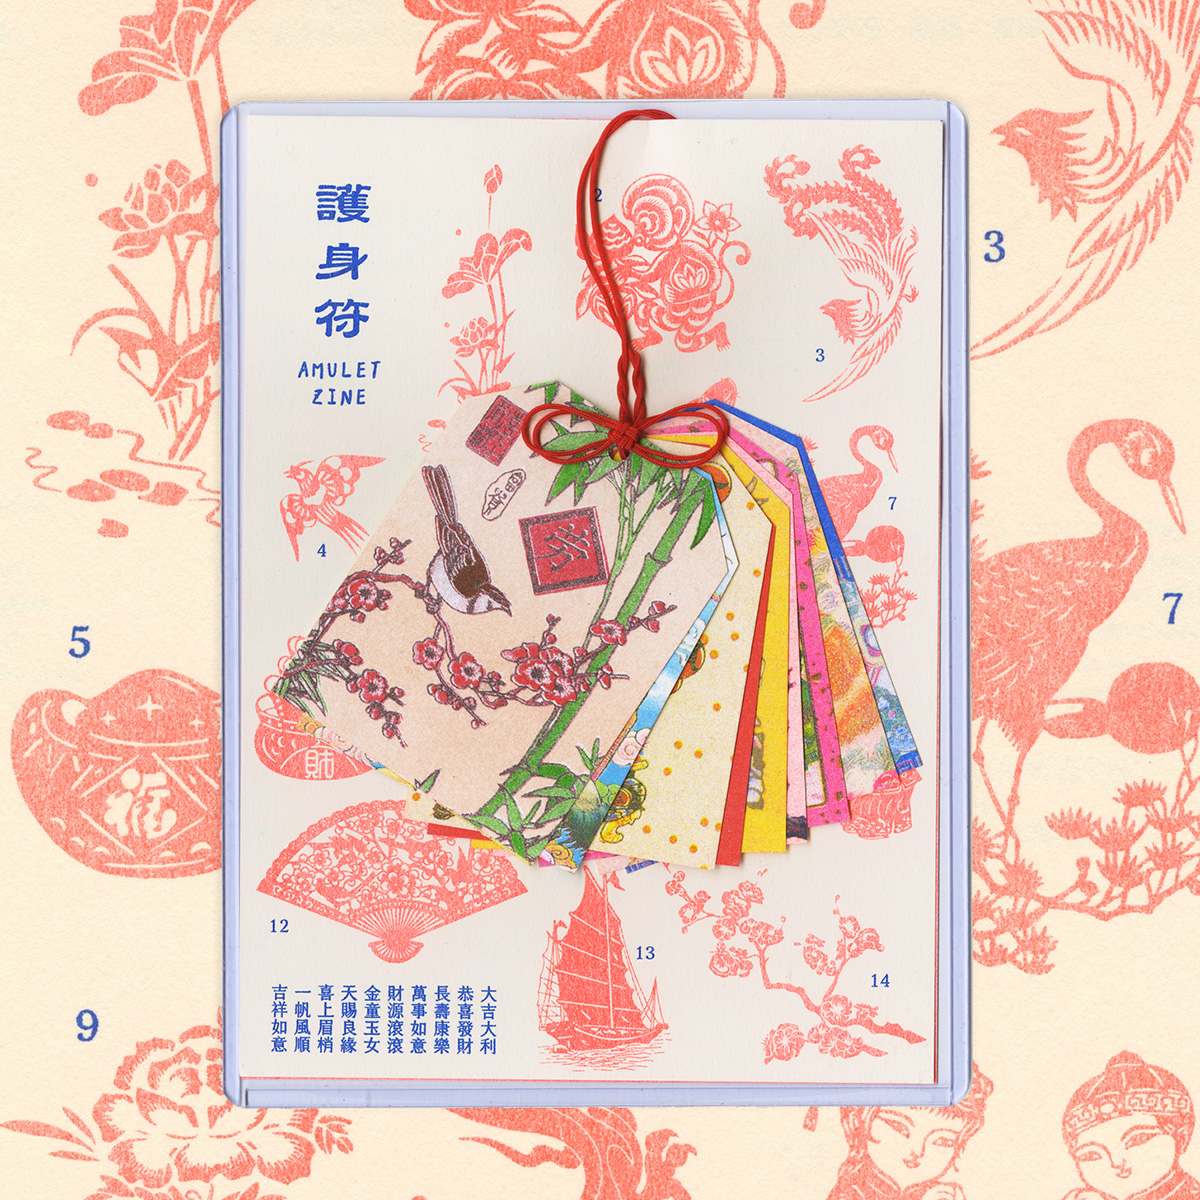 A notebook that has on top of it a set of green, blue, red, yellow, pink and white cloth labels tied together with a red string. On the notebook there are some Asian text and drawings of plants, animals, ships and people.